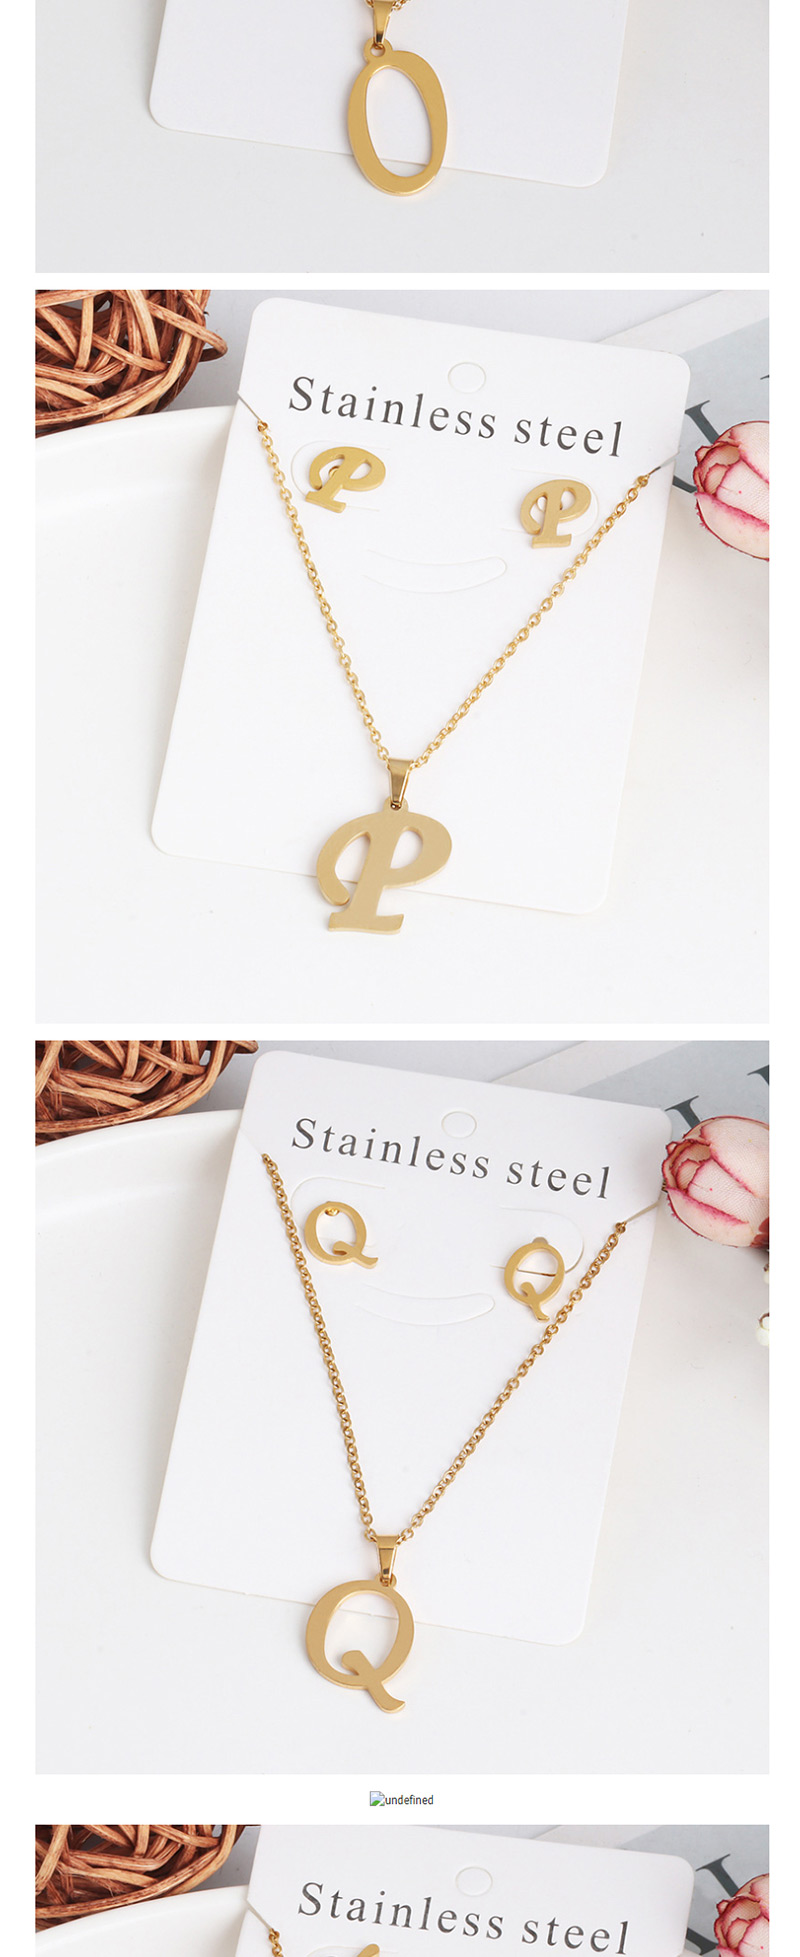 Fashion X Gold Stainless Steel Letter Necklace Earrings Two-piece,Jewelry Sets